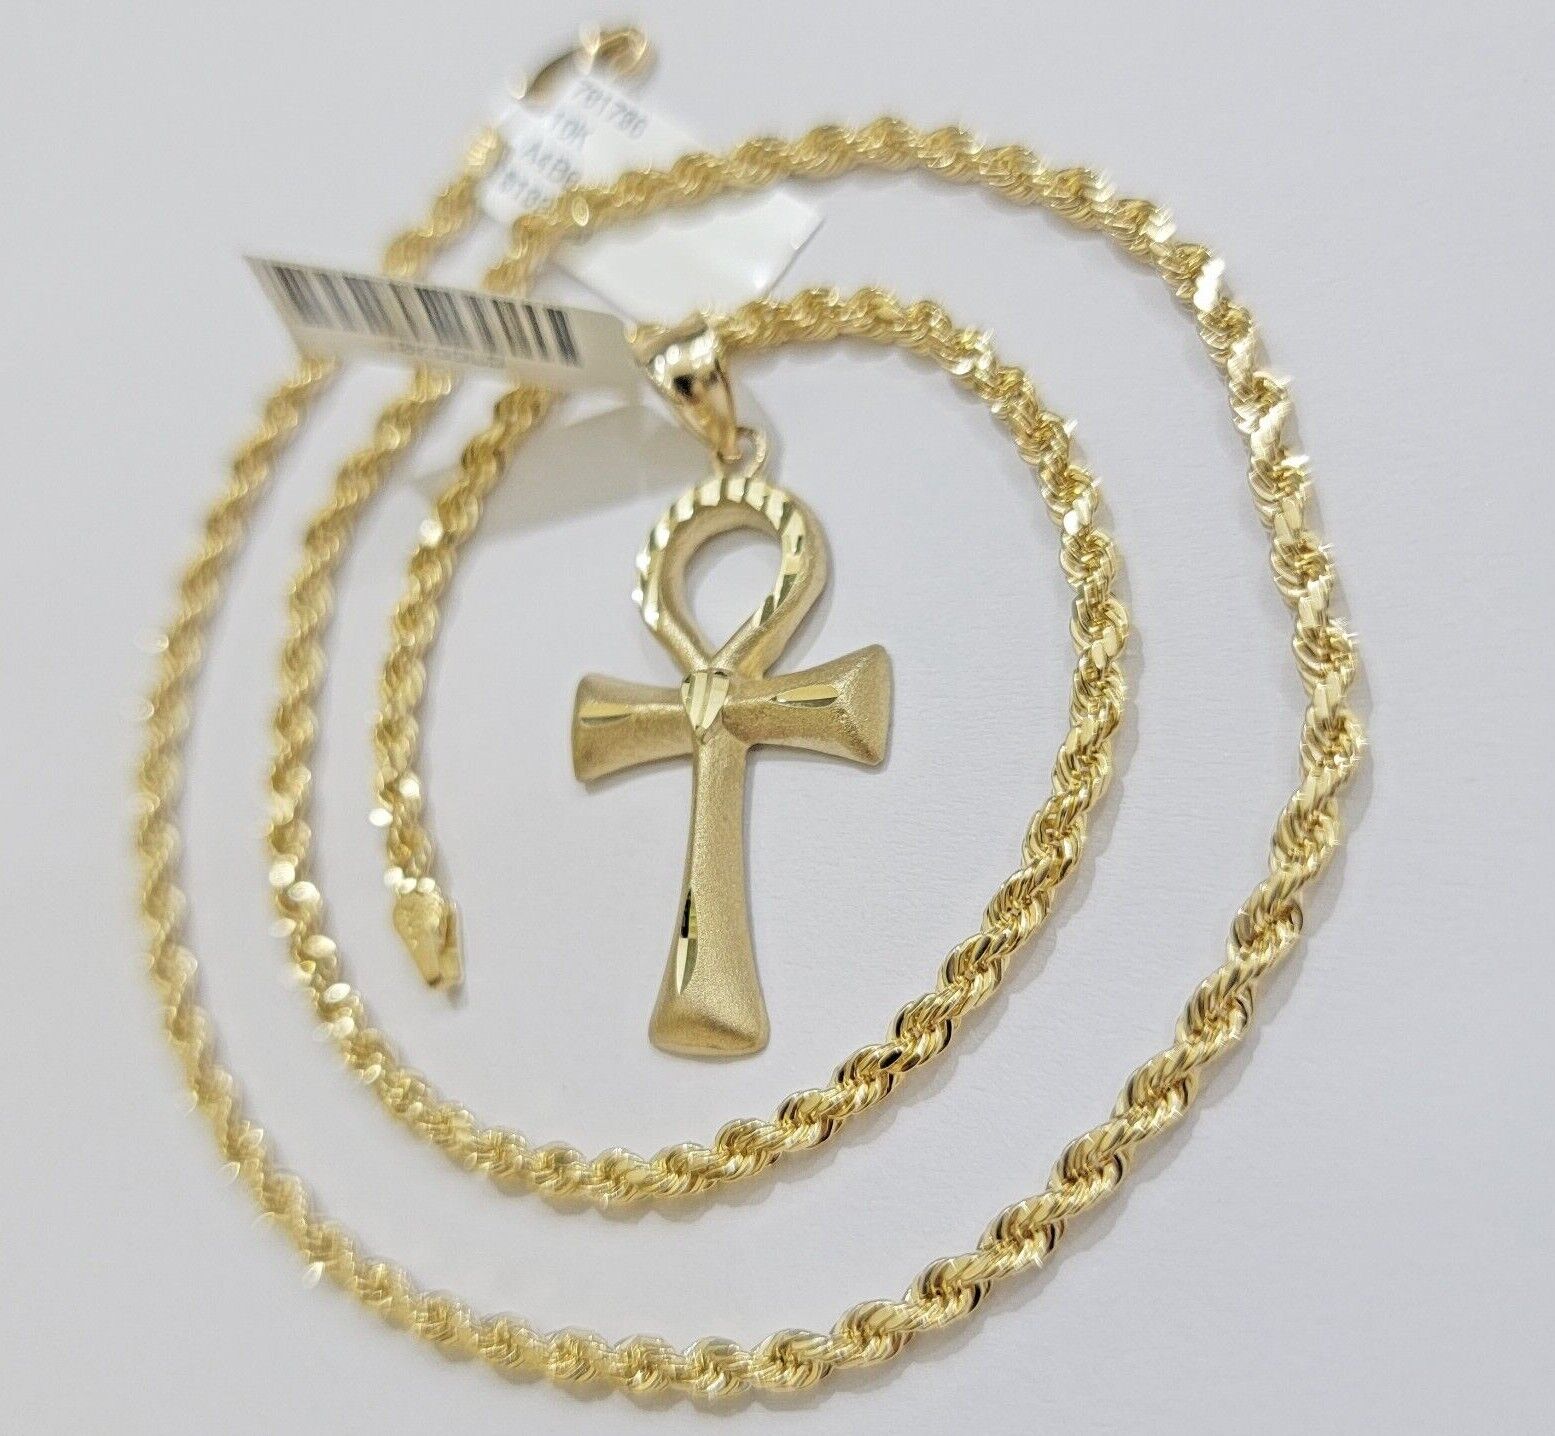 10k Gold Rope Chain Ankh Cross Charm Pendant Set 18" Inch 3mm Necklace, REAL SET